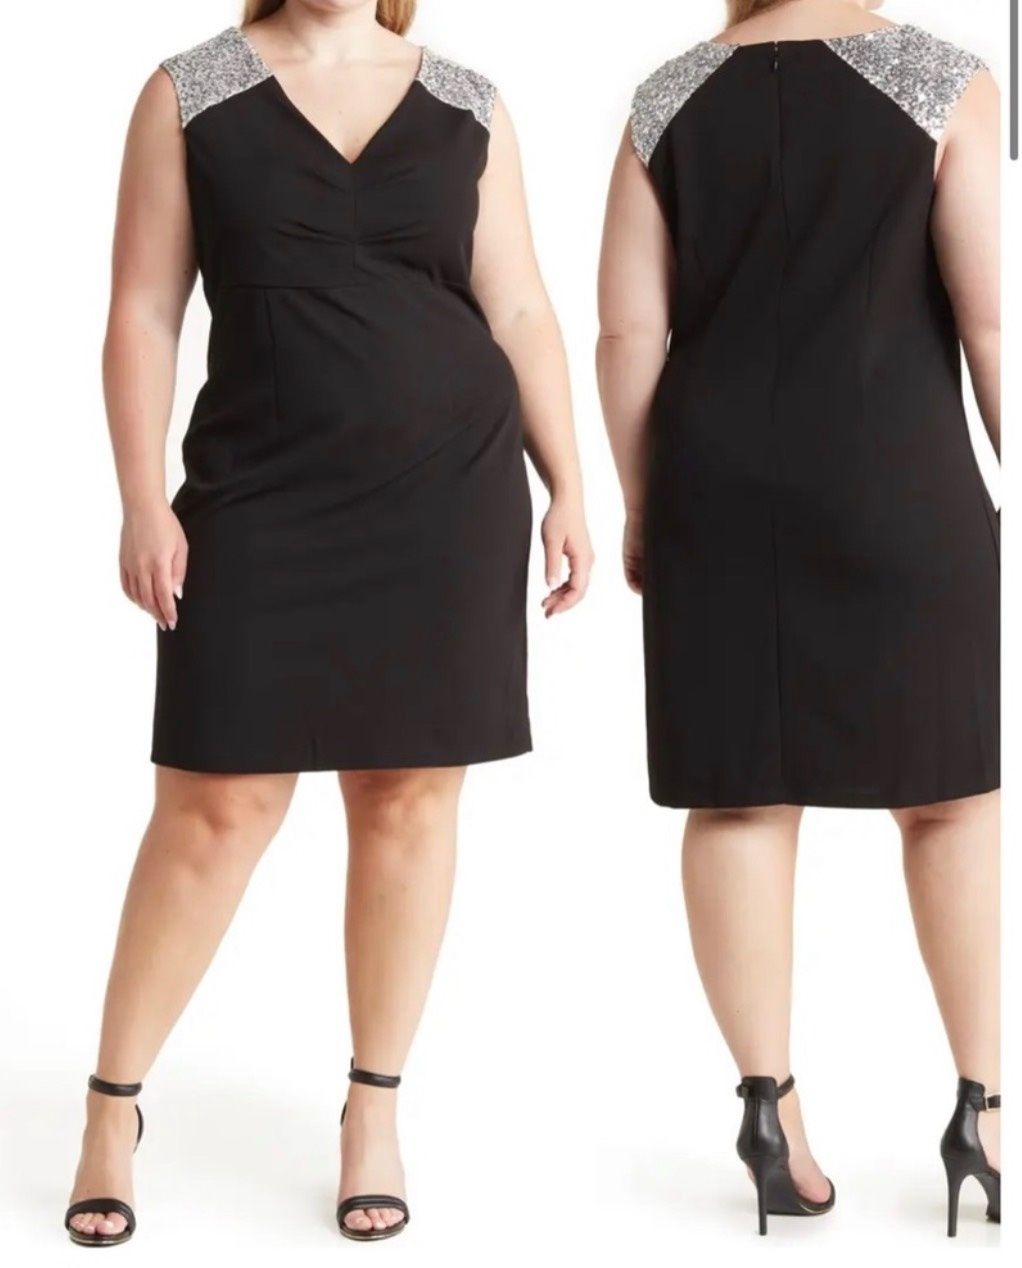 Plus Size Work Dresses - Plus Size Work Clothes - Sumissura